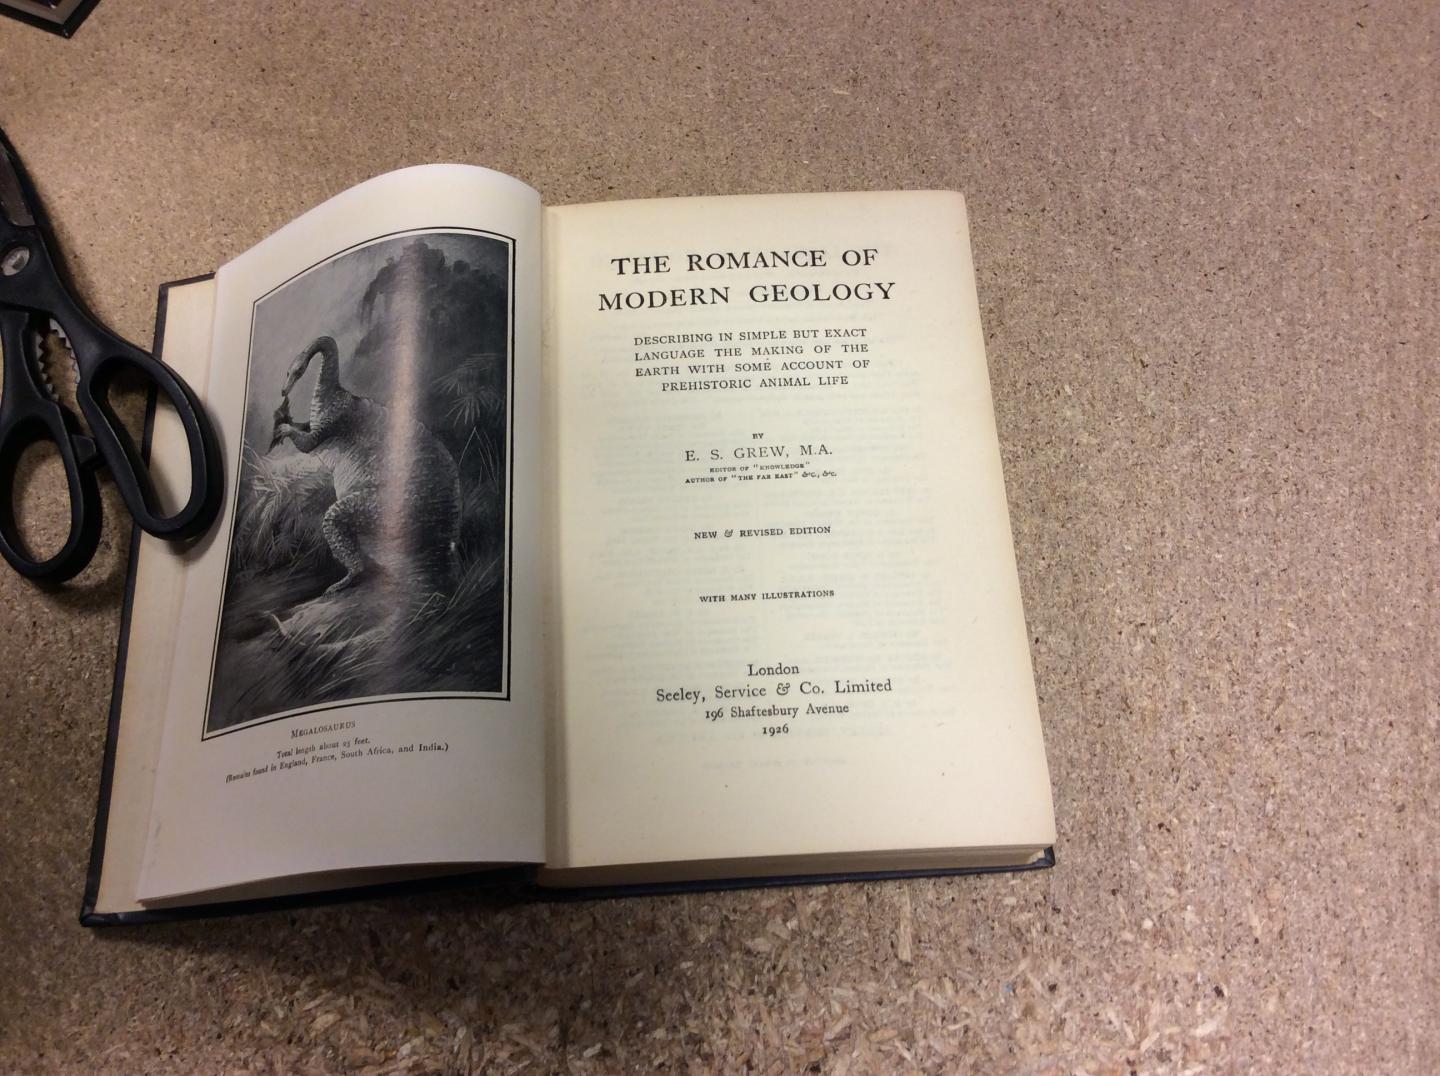 Grew, Edwin S. - The Romance of Modern Geology Describing in Simple But Exact Language the Making of the Earth, with Some Account of Prehistoric Animal Life